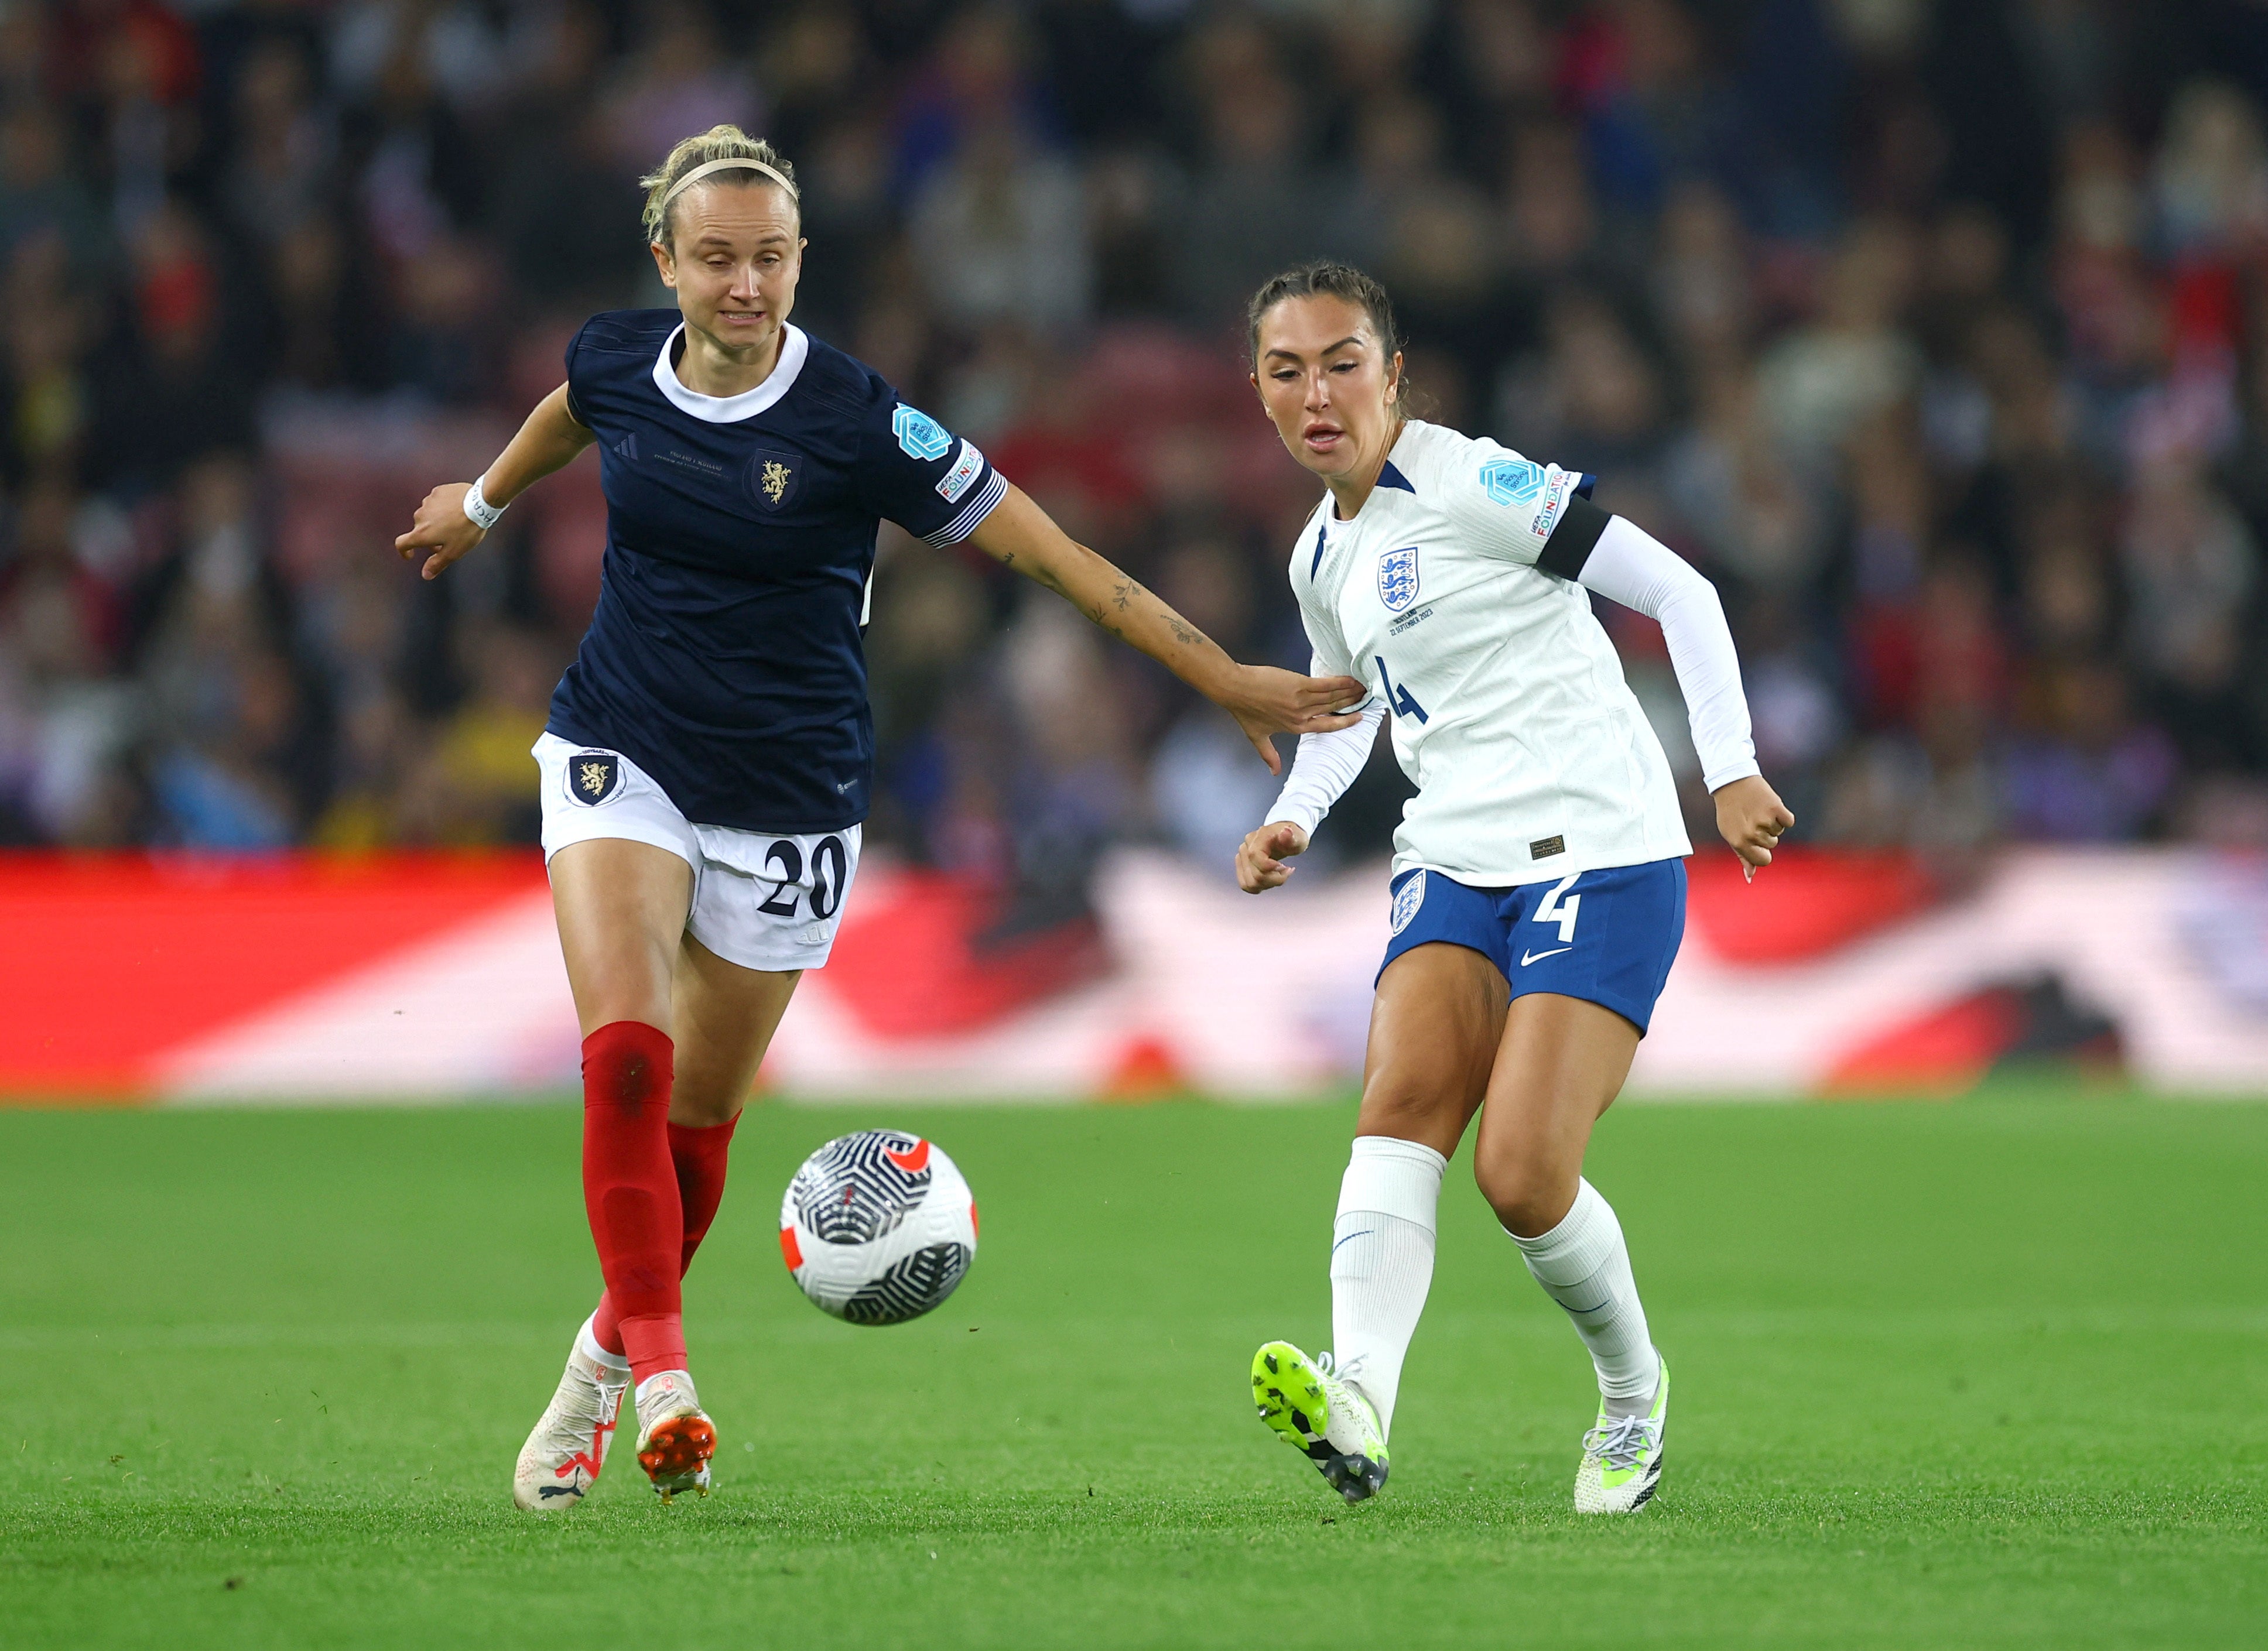 Katie Zelem has made a strong case for a regular slot in the England side